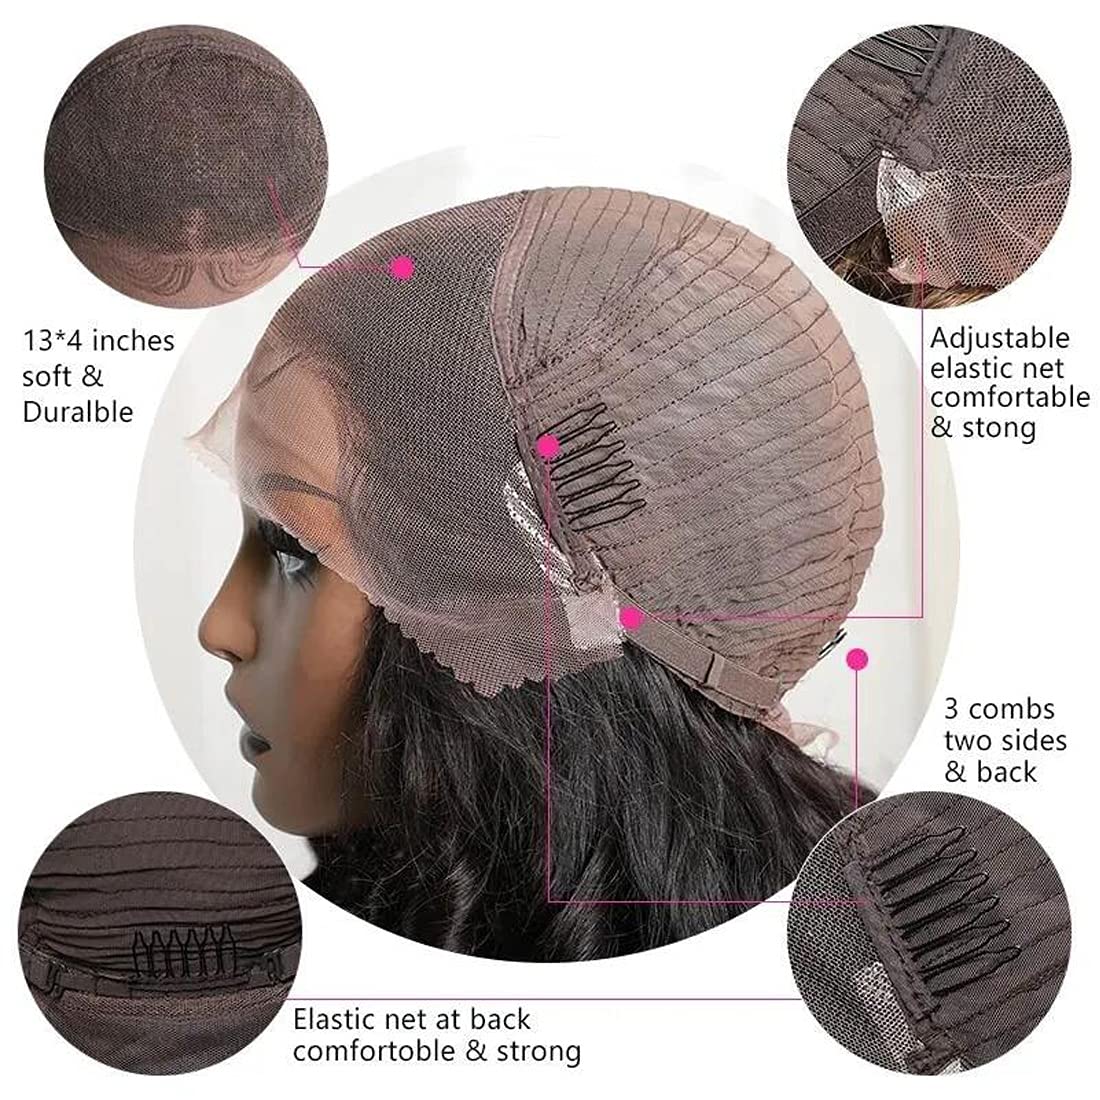 Spiral Curl 13X4 Lace Front Wig Human Hair for Black Women,10a Brazilian Virgin Hair 18inches